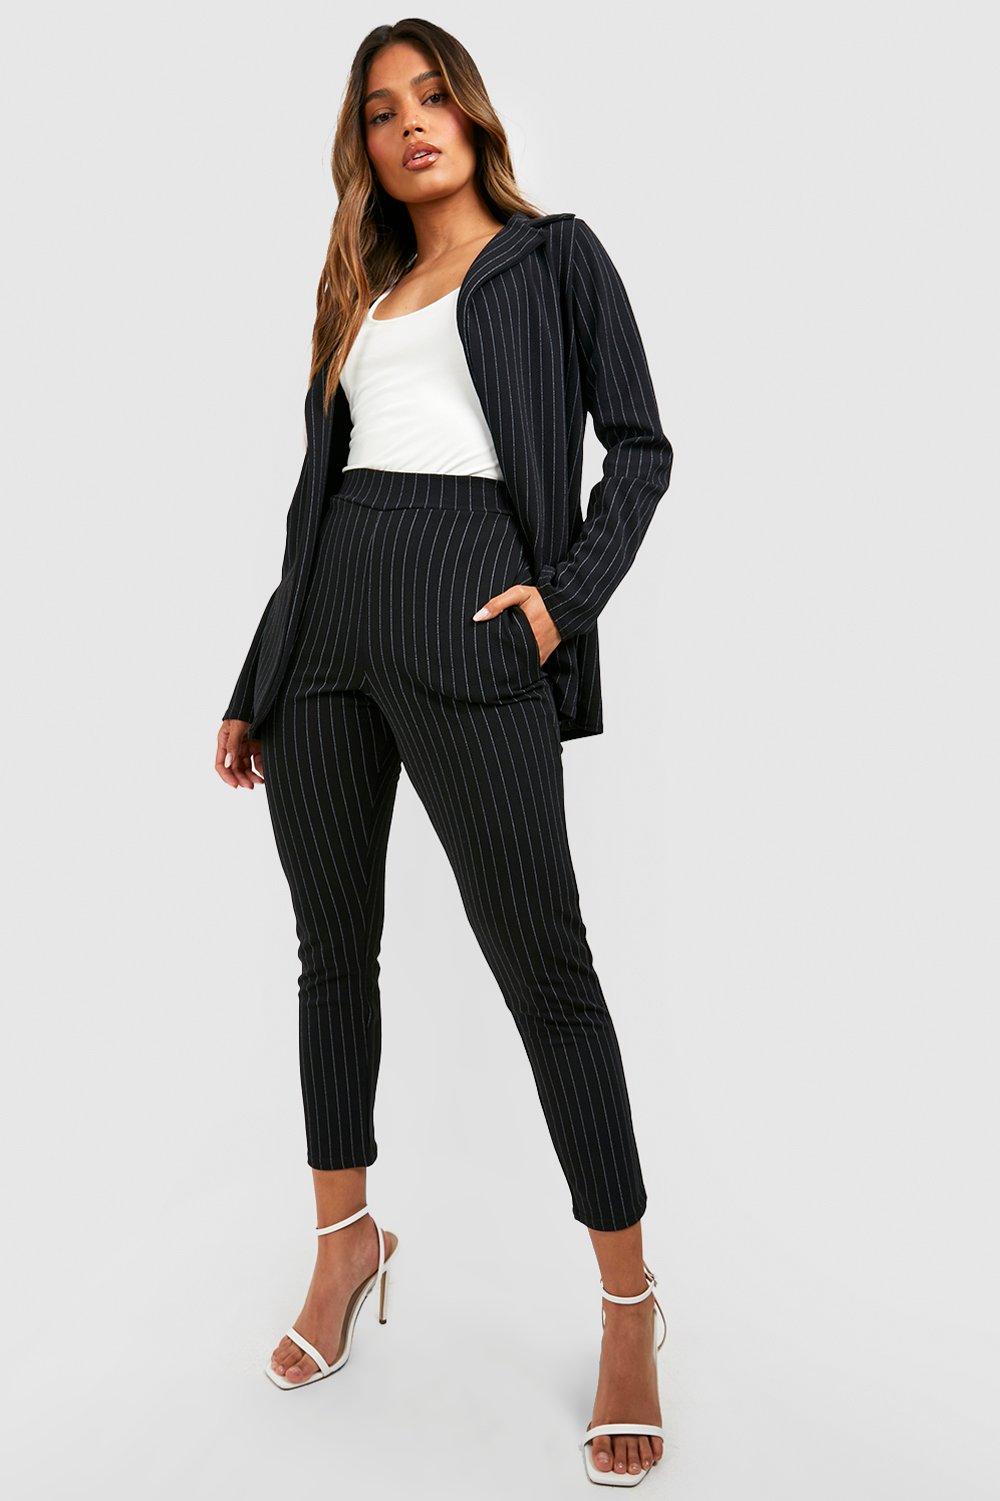 boohoo Women's Pinstripe Tailored Blazer And Trouser Co-Ord Suit|Size: 8|black